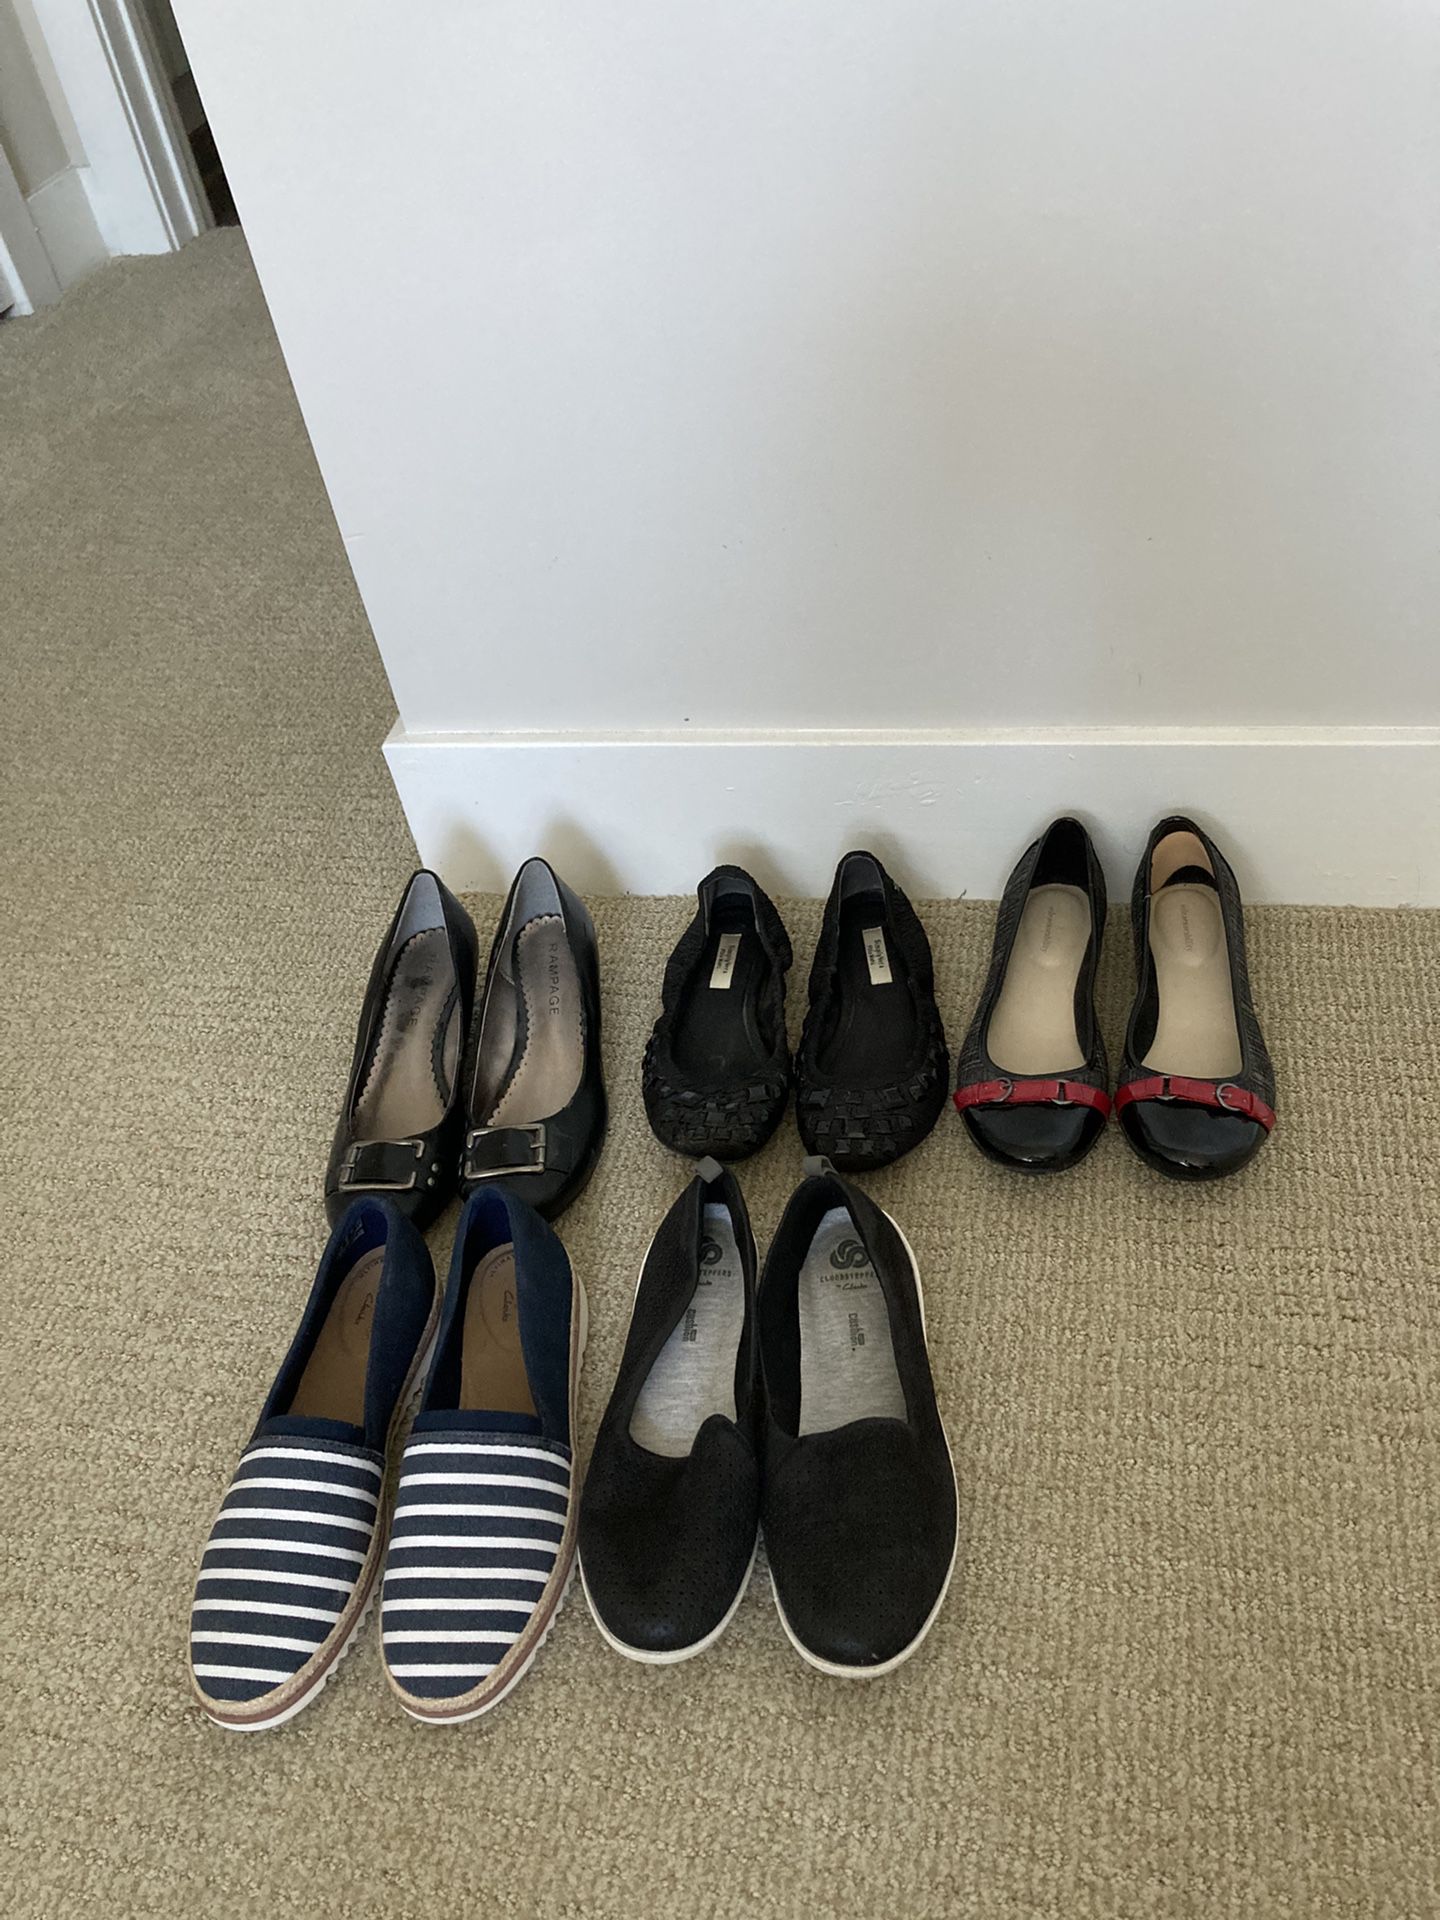 Womens flat shoes size 7-8.5